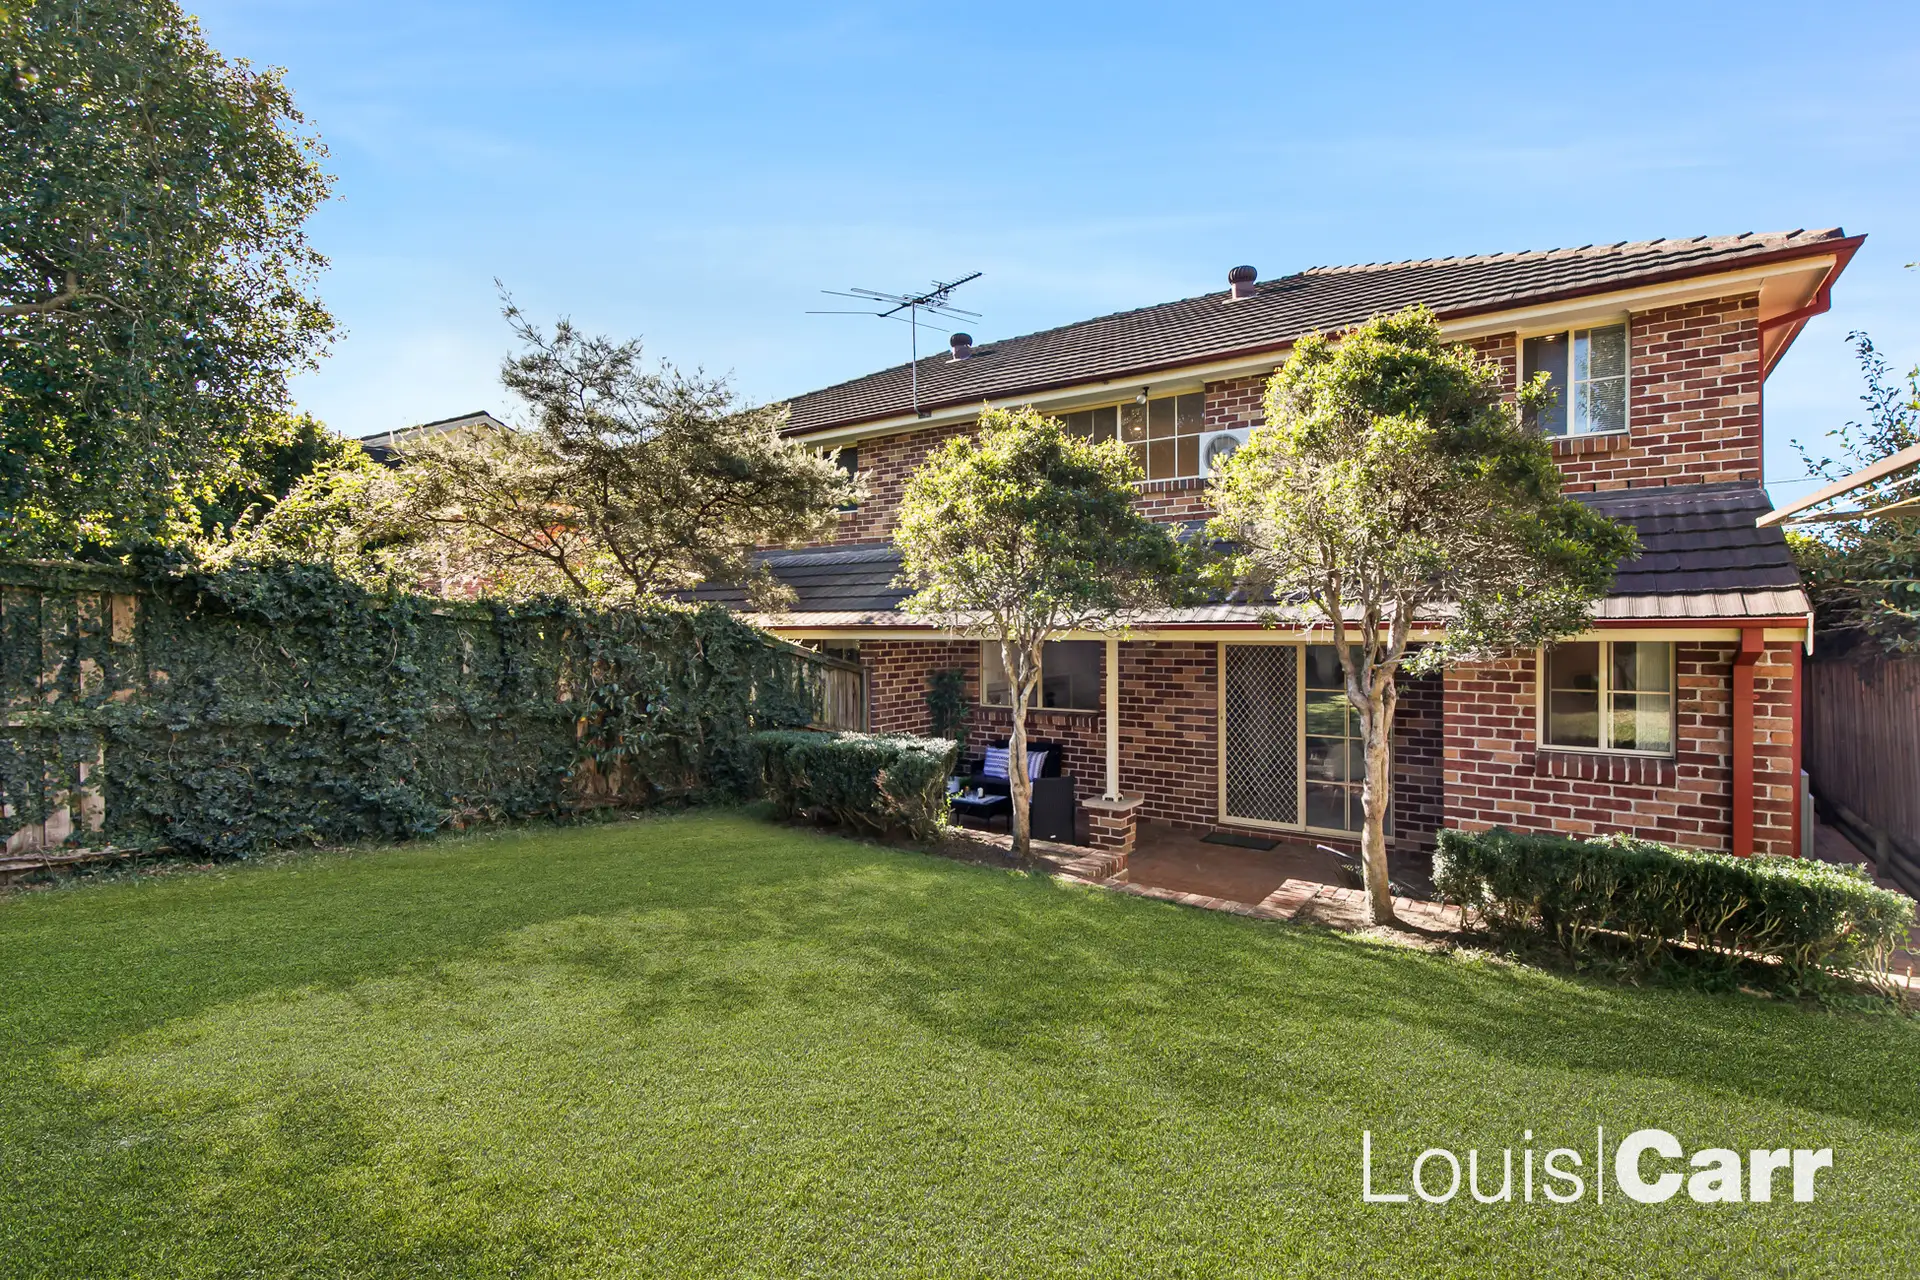 Photo #5: 1/8 Haven Court, Cherrybrook - Sold by Louis Carr Real Estate